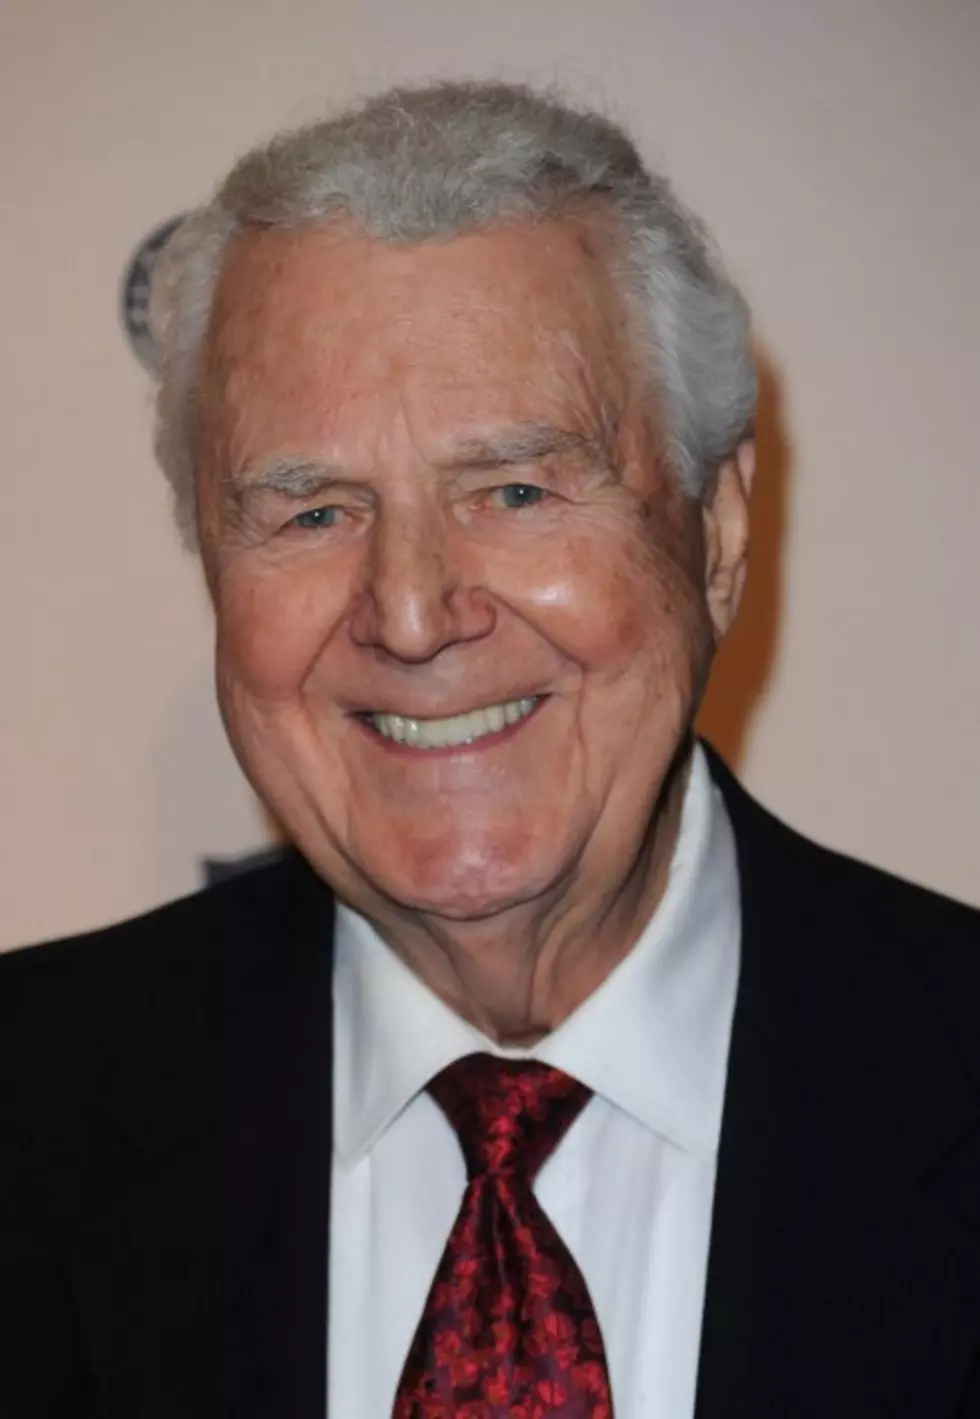 Snl Announcer And Broadcasting Legend Don Pardo Dead At 96 